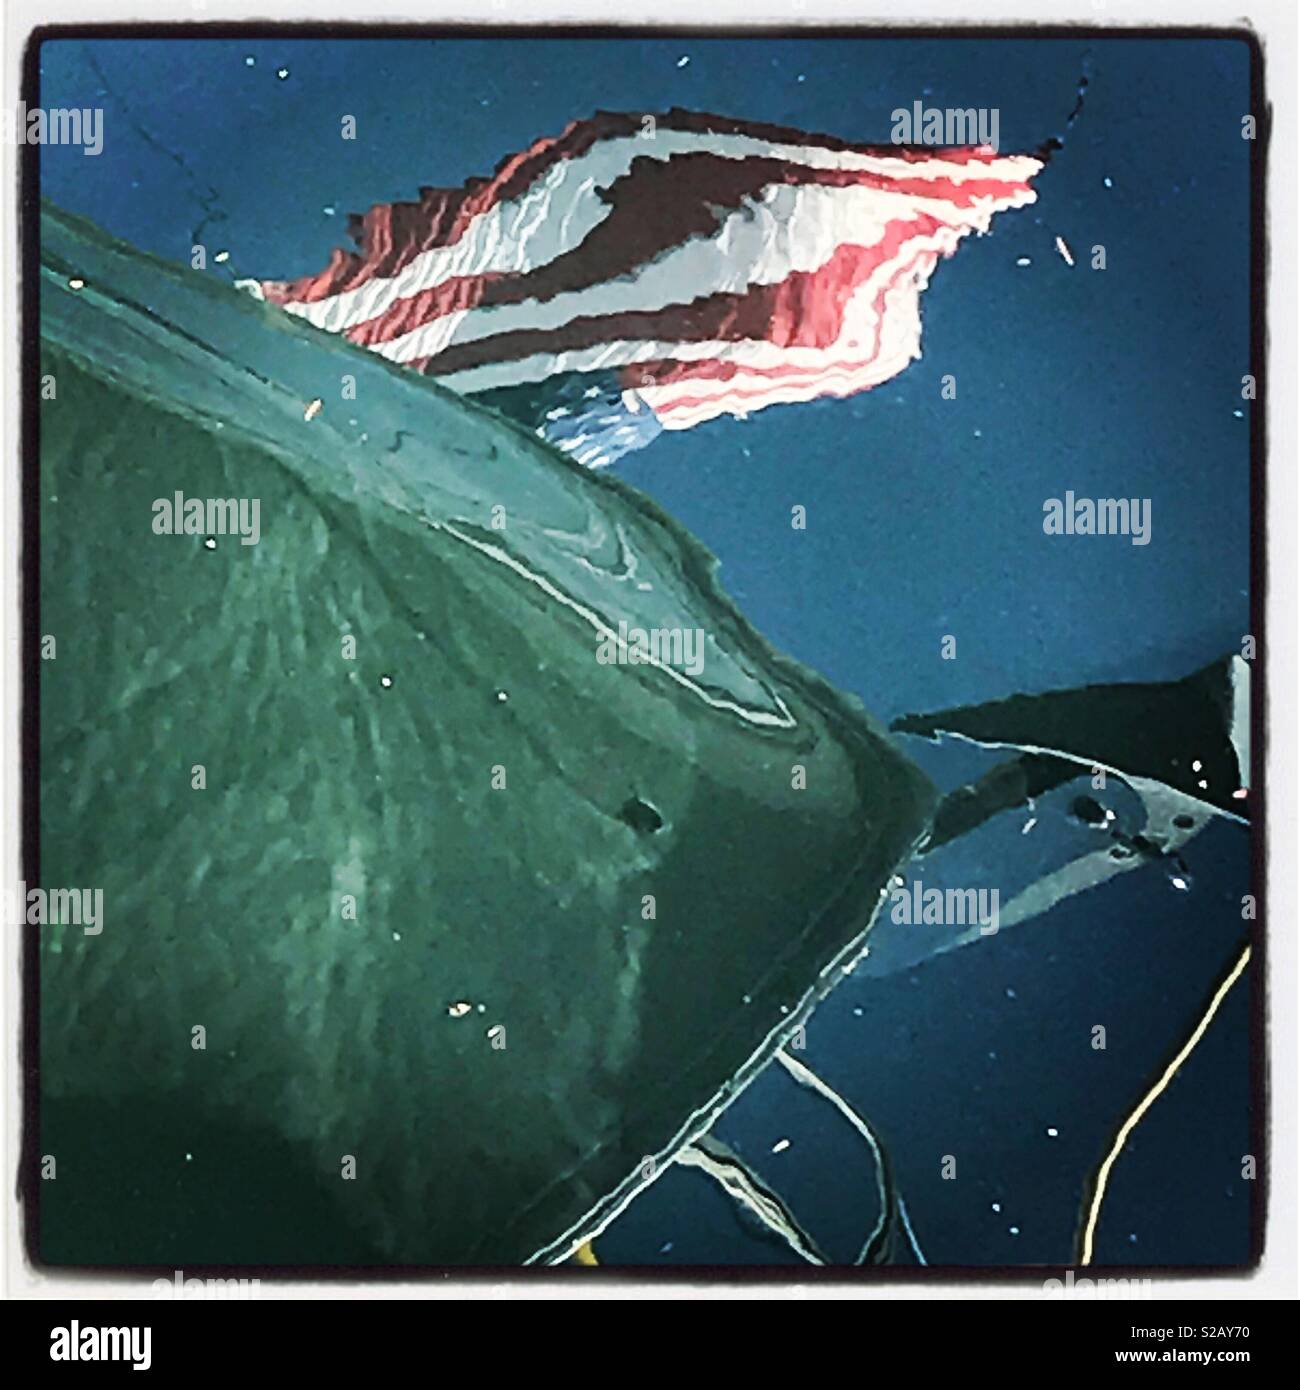 Reflections of an American flag and the bow of a boat on the surface of the water. Stock Photo